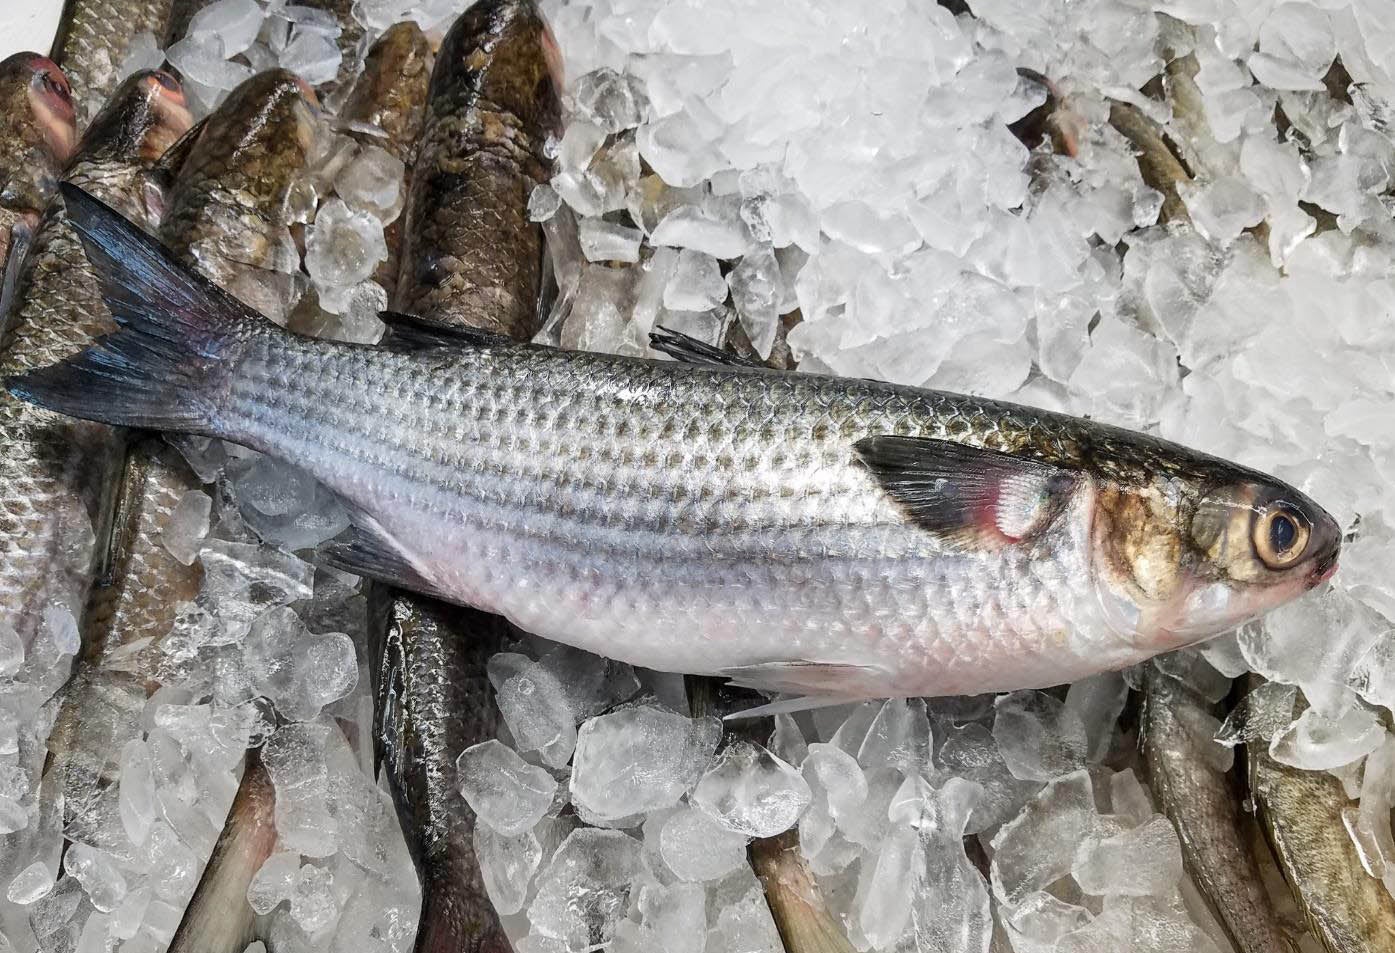 Wanna Step Outside? Overfishing mullet results in restrictions